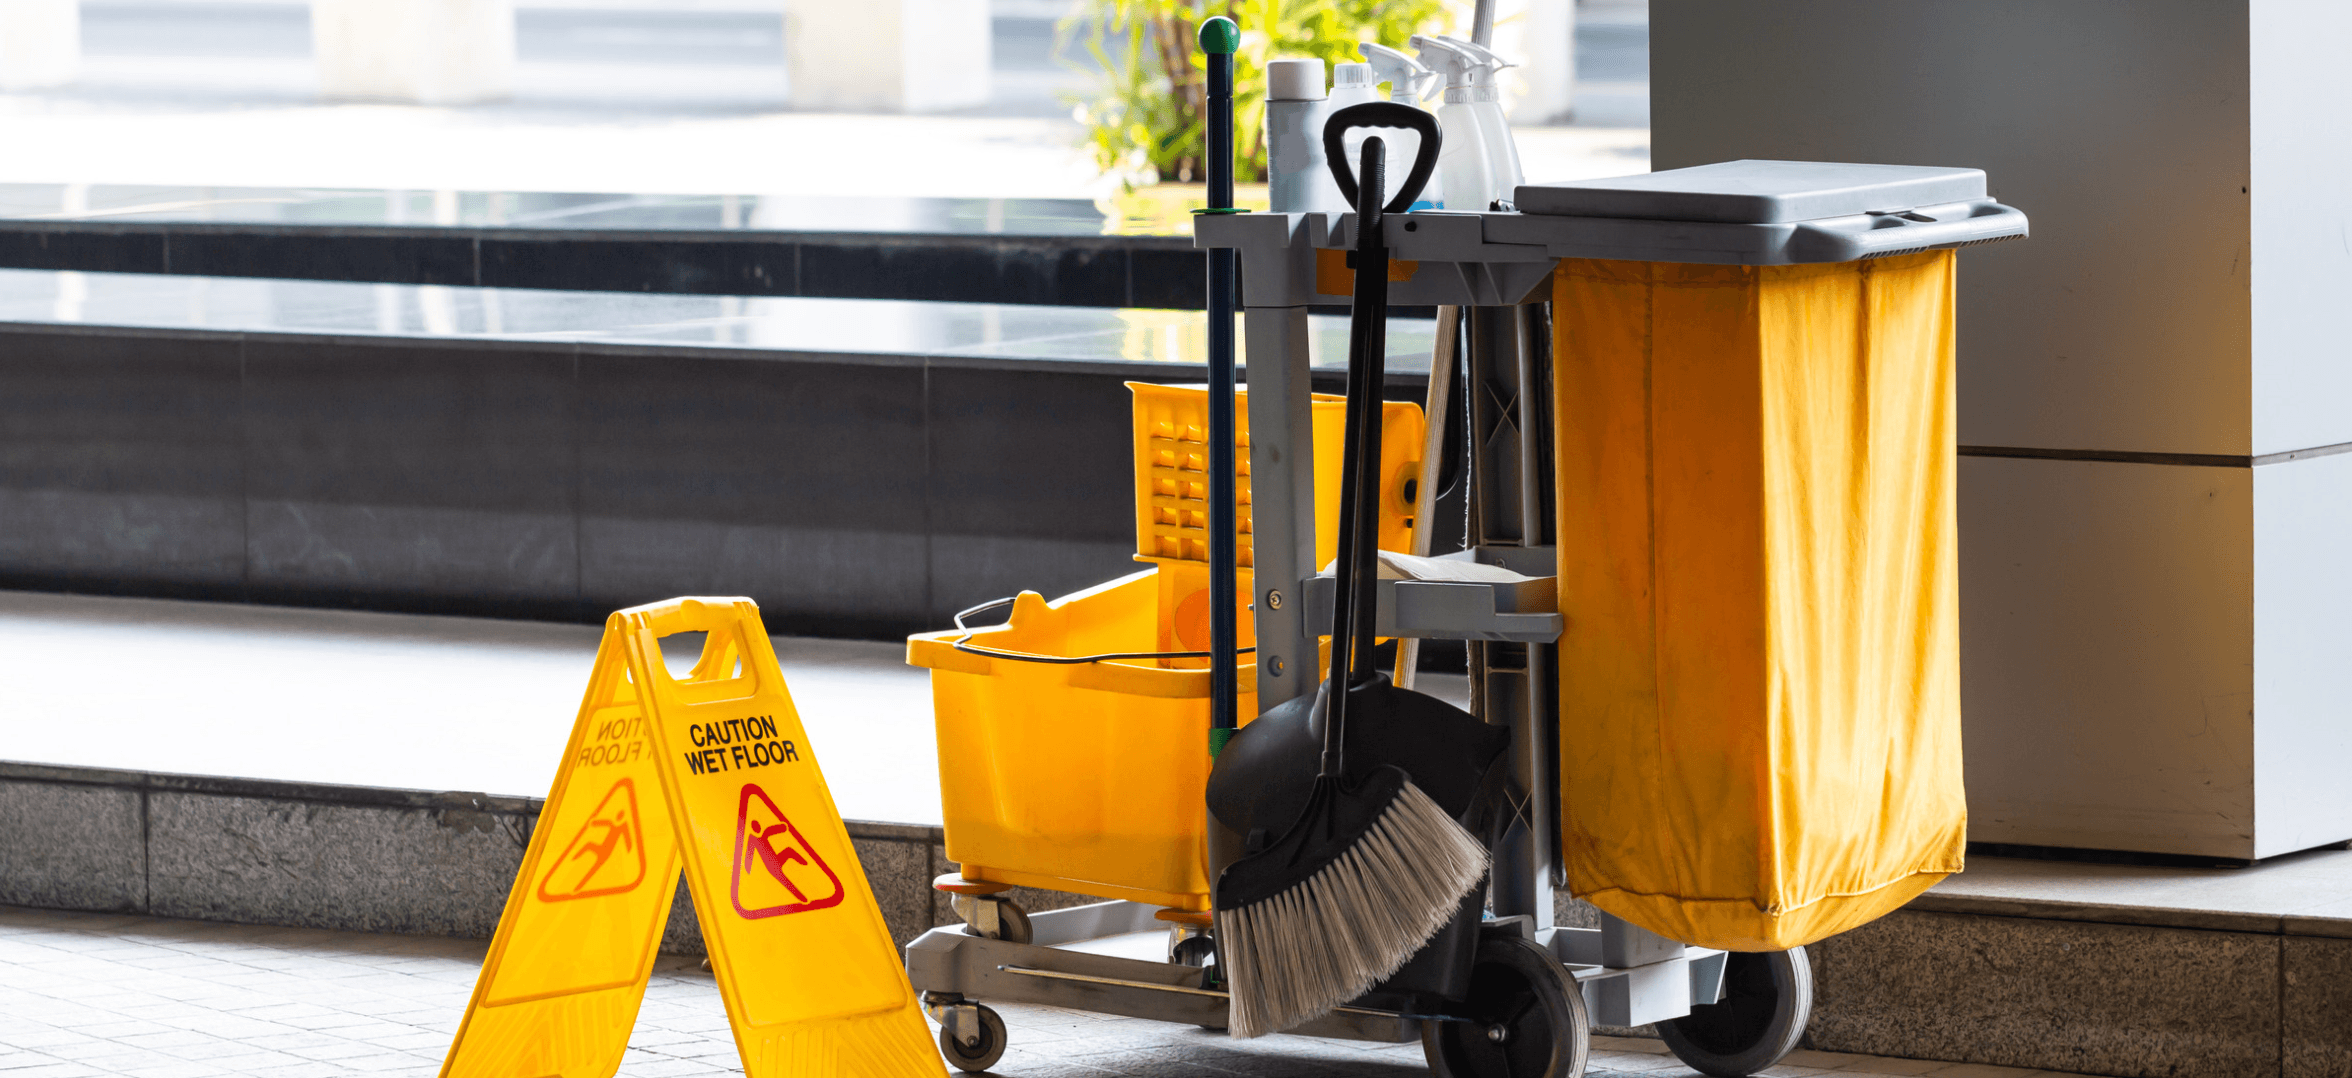 A cleaning cart in front of a large window with a caution wet floor sign.